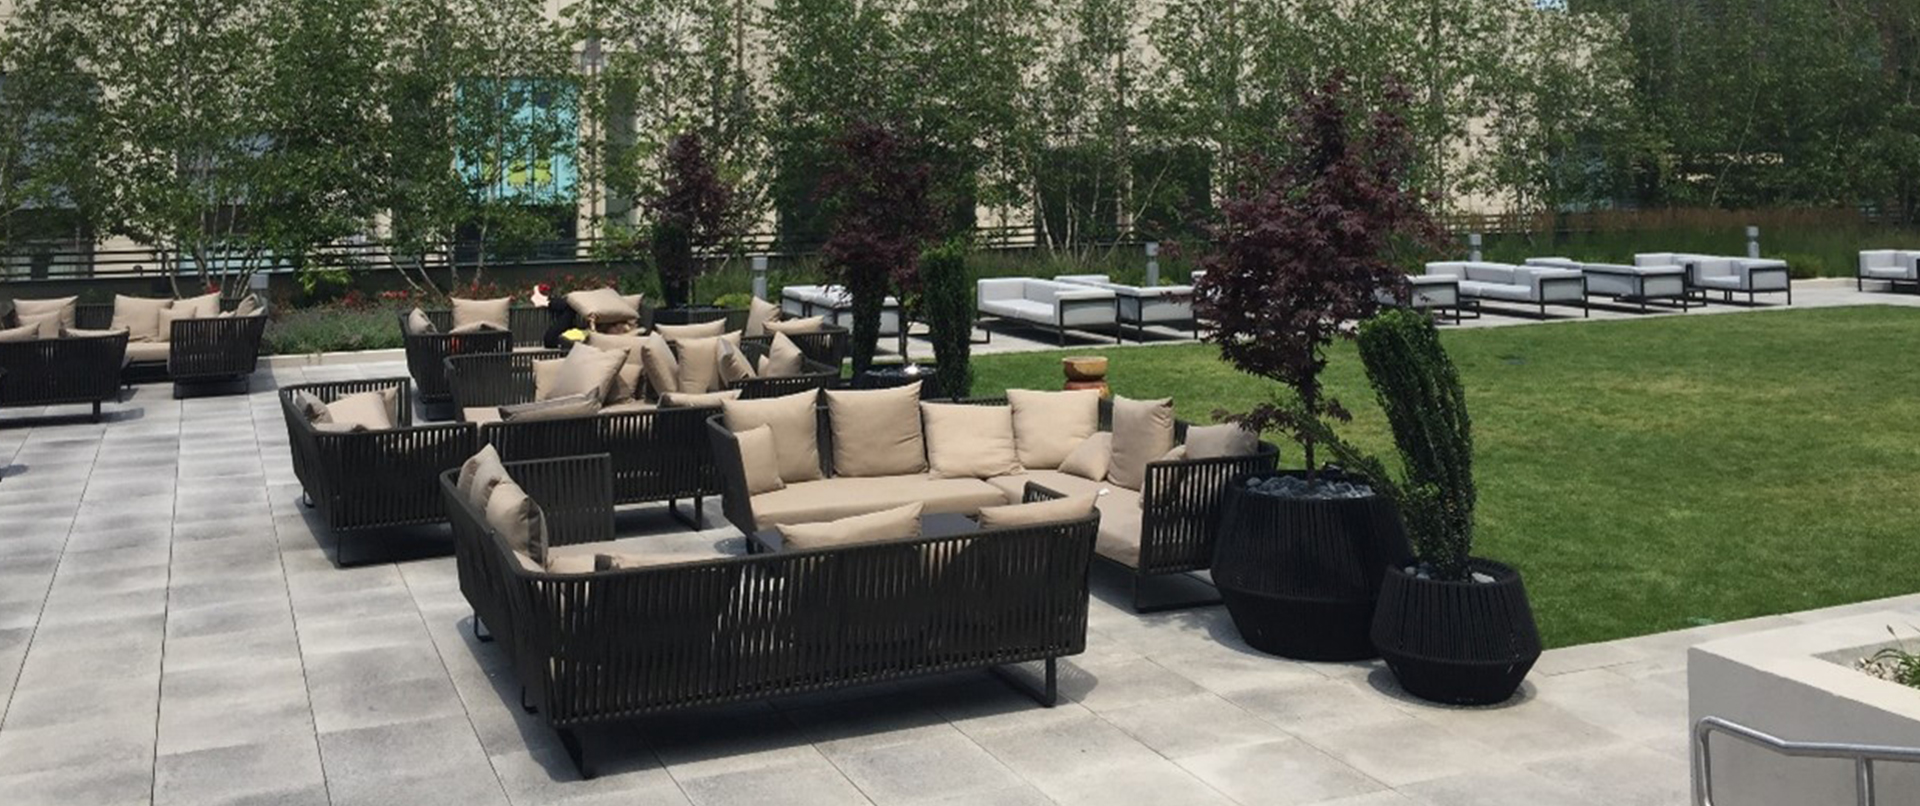 Rooftop Lounge Seating Area with Greenspace